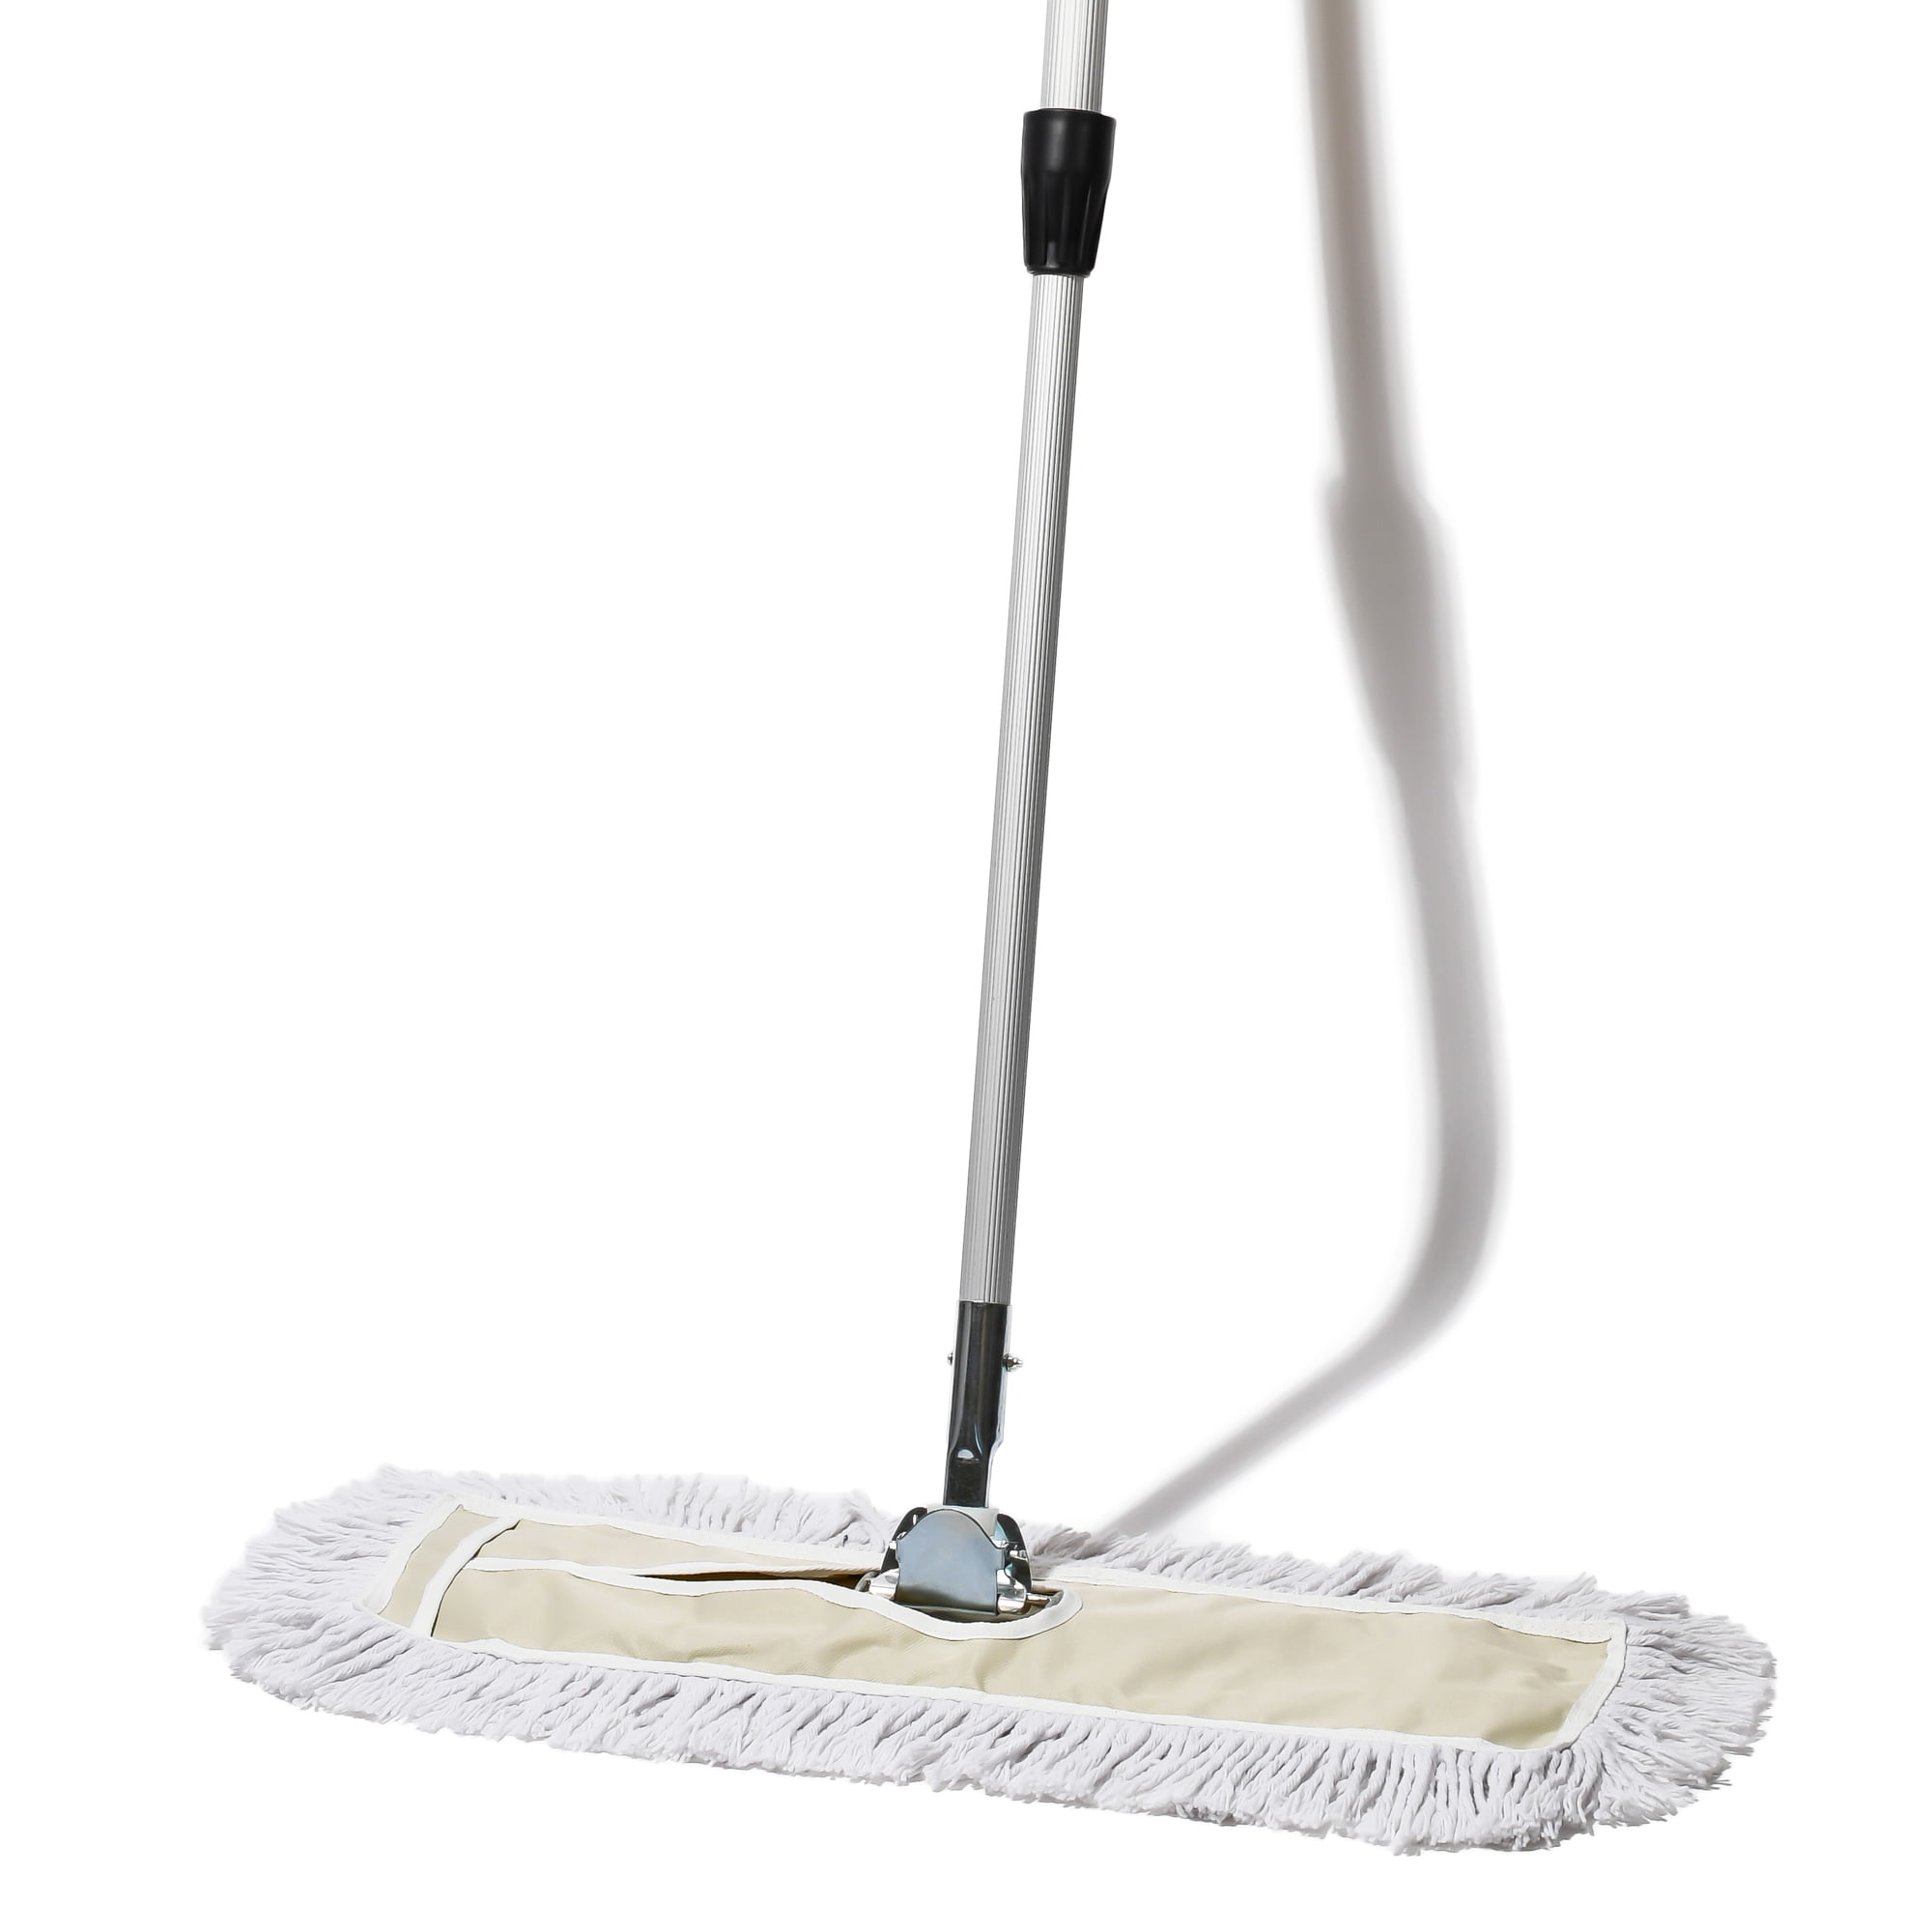 Dust Mop For Dry And Wet Cleaning, How To Dry Mop Hardwood Floors